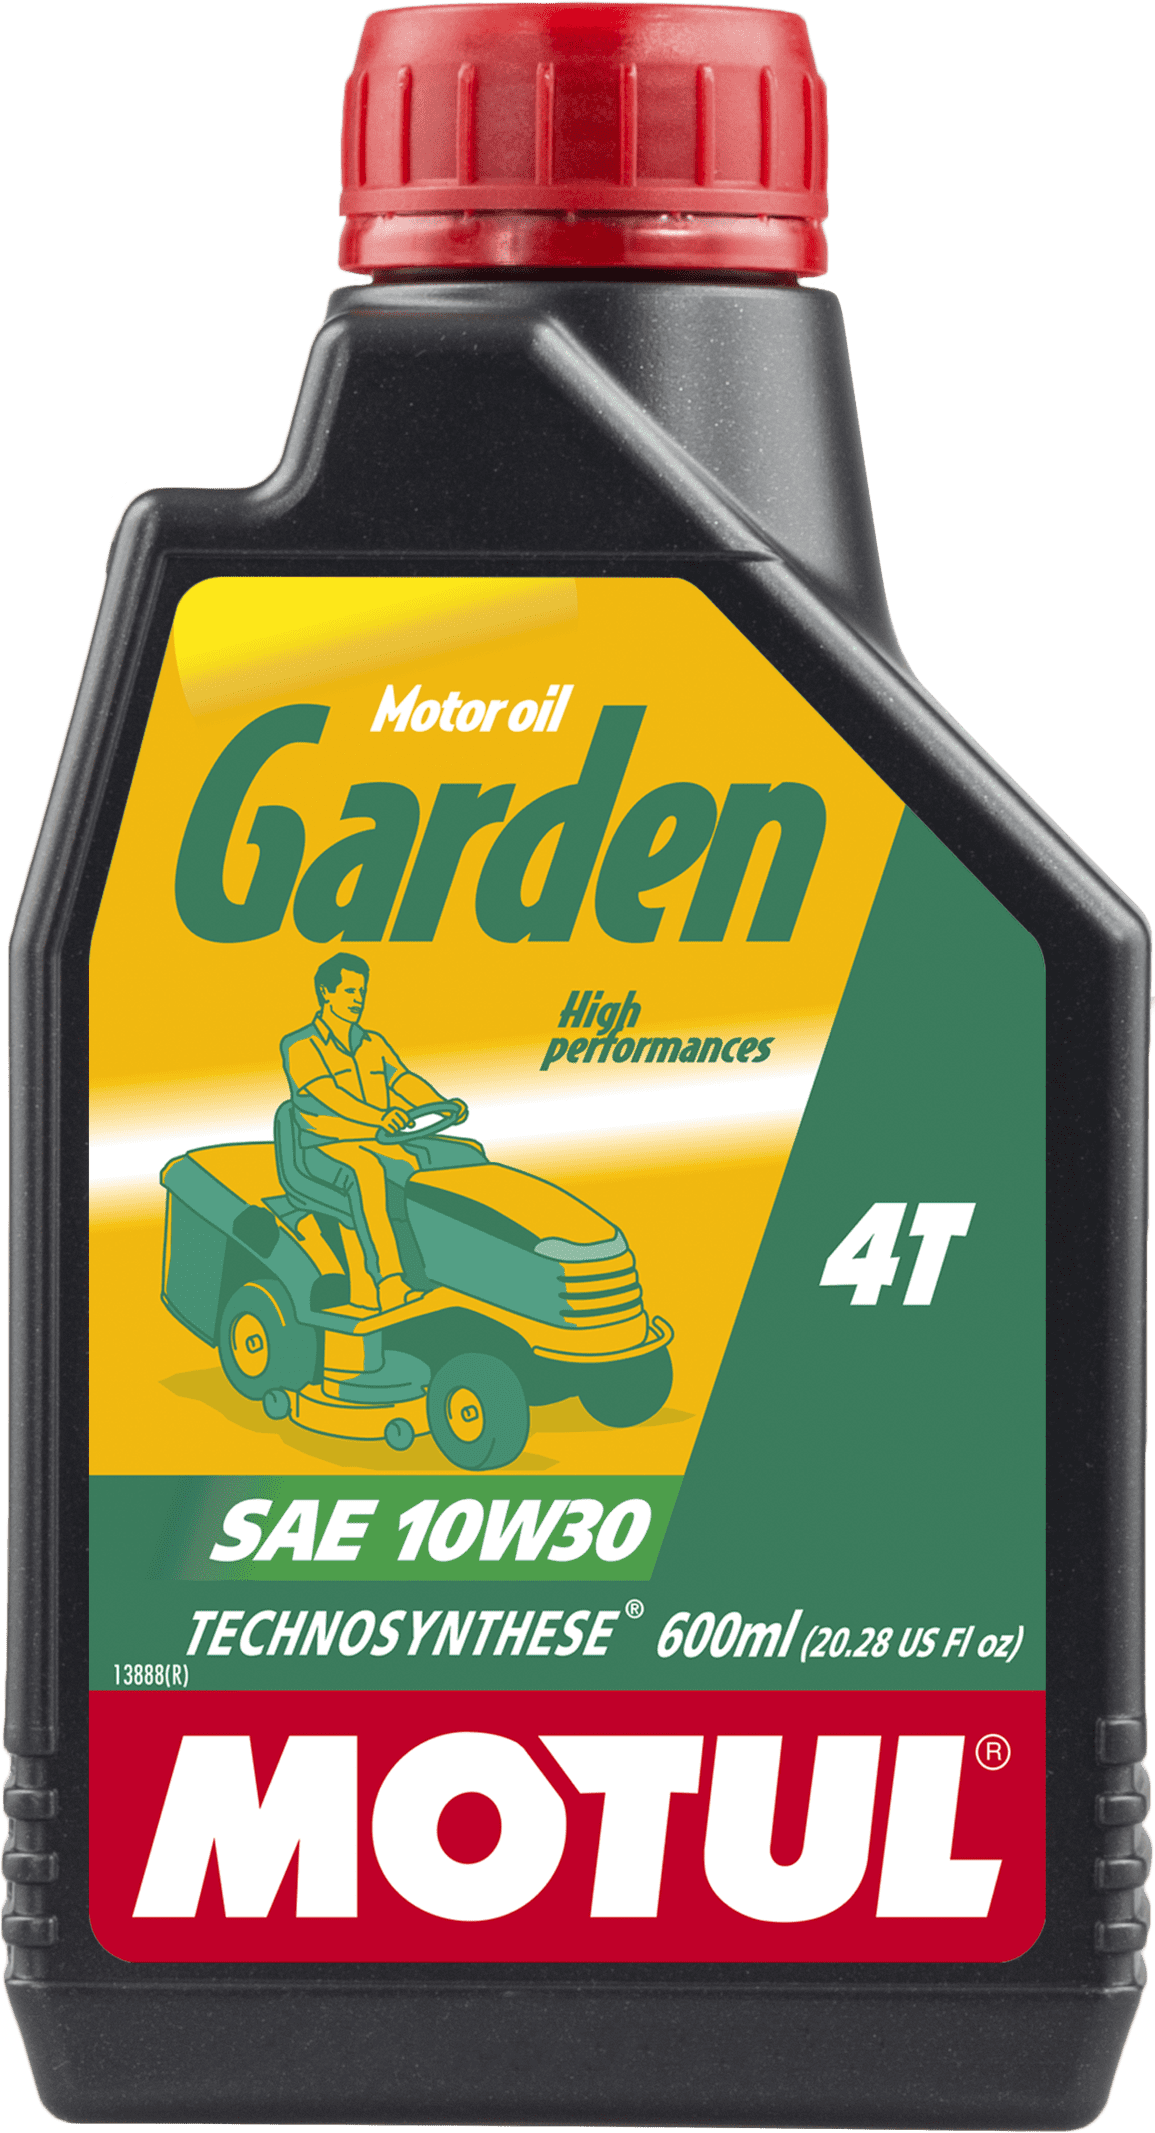 106990-600ML Technosynthese® lubricant specially formulated for use in recent motorized garden tools and small farming equipment.